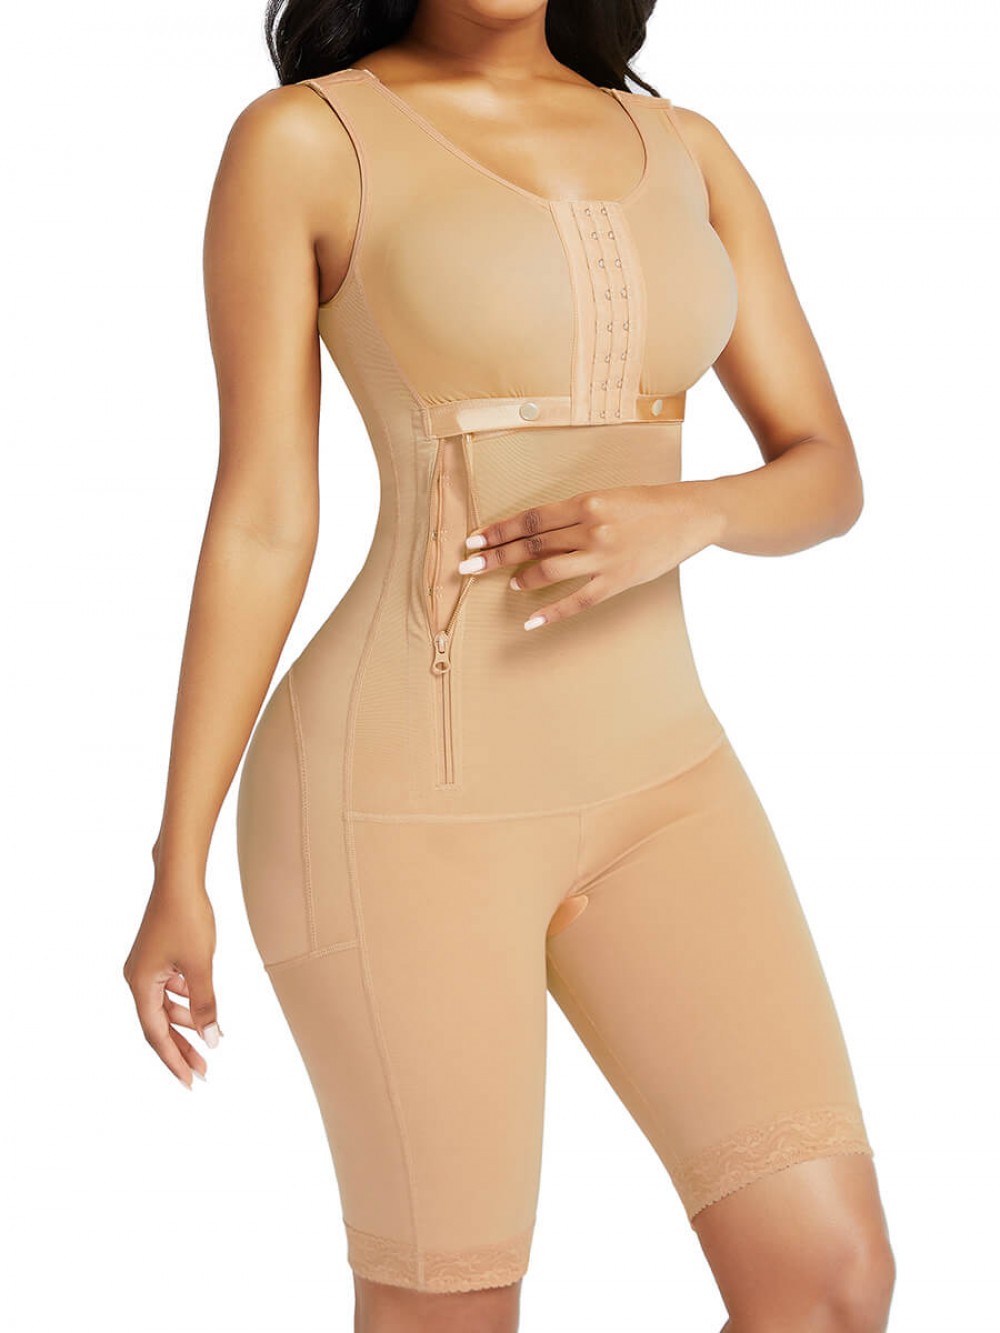 Nude Tummy Control Shapewear Butt Lifter Effective Durable Superfit Everyday